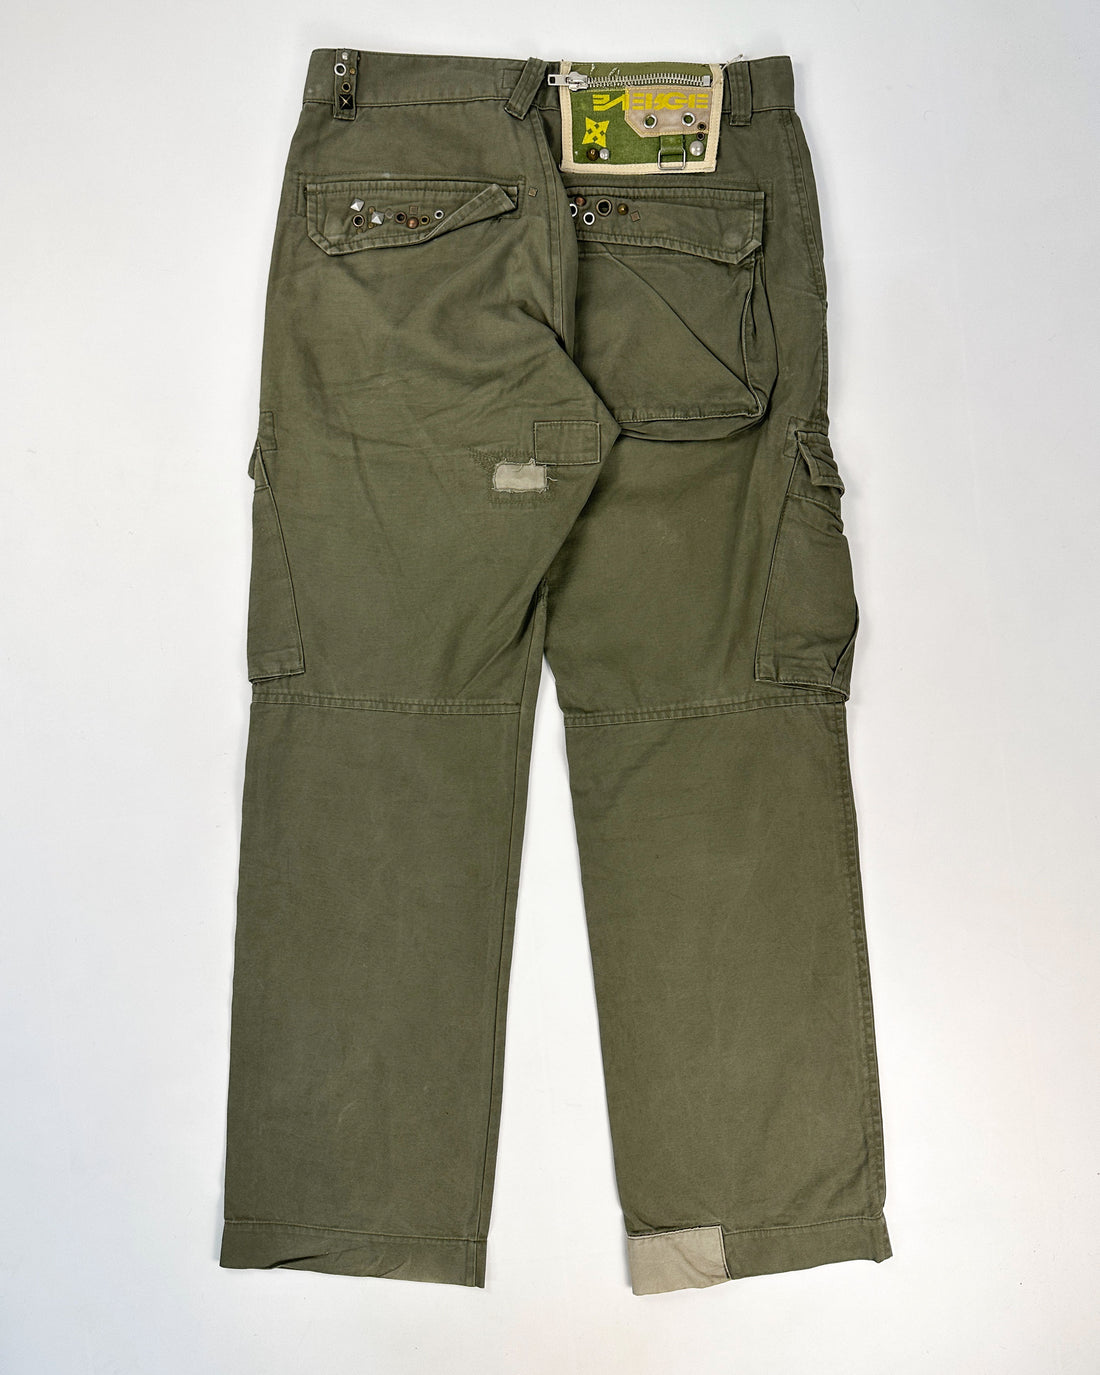 Energie Utility Decorated Green Pants 2000's